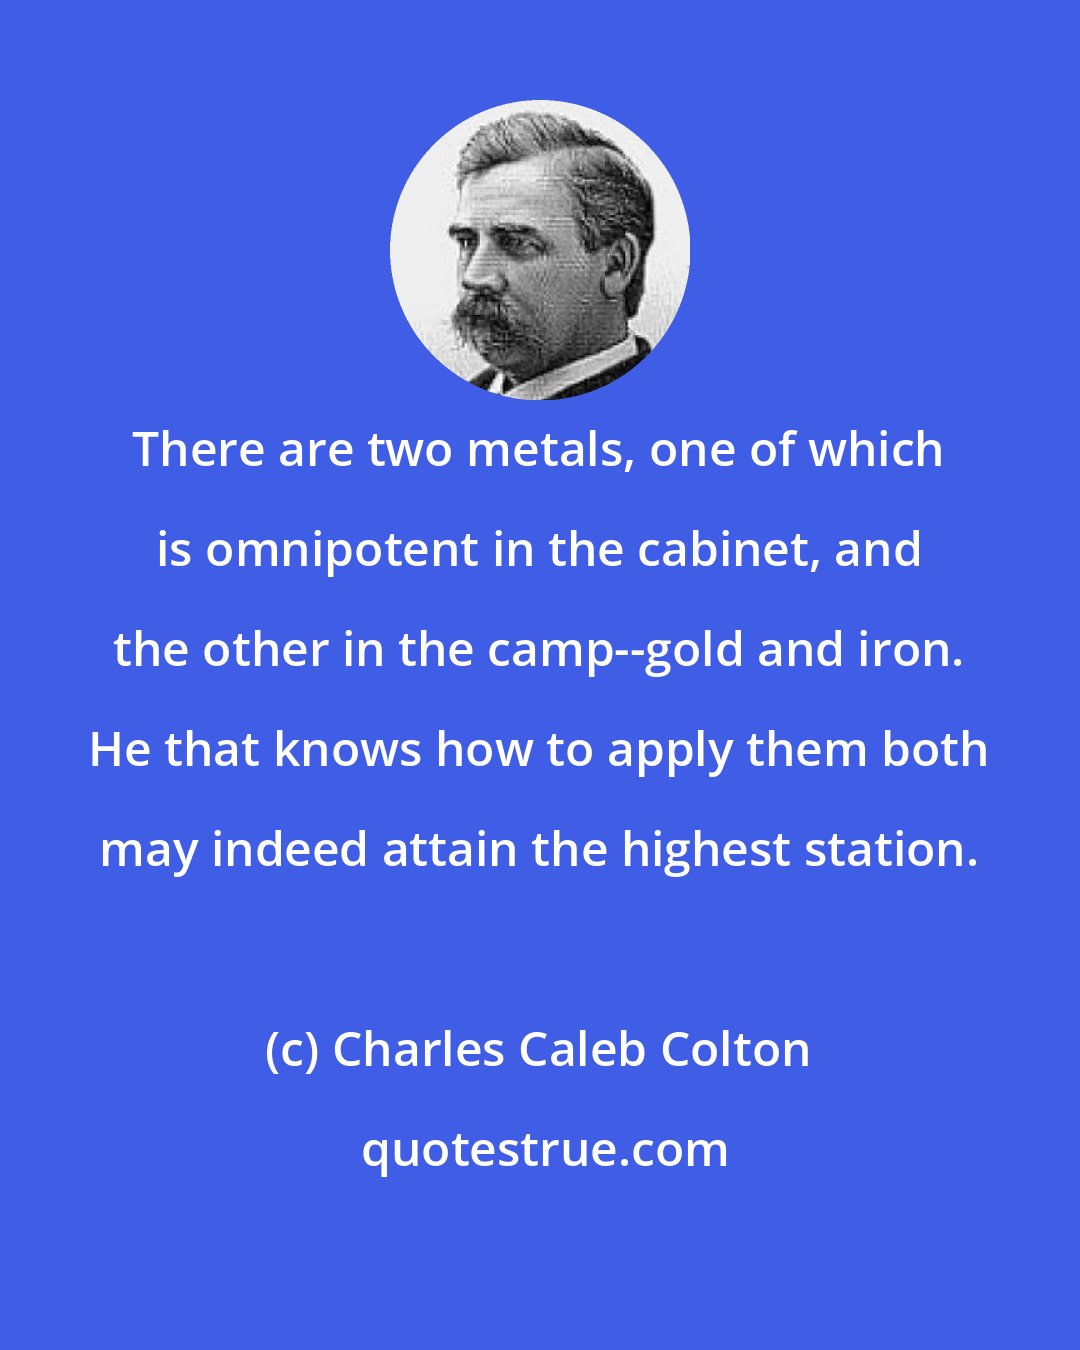 Charles Caleb Colton: There are two metals, one of which is omnipotent in the cabinet, and the other in the camp--gold and iron. He that knows how to apply them both may indeed attain the highest station.